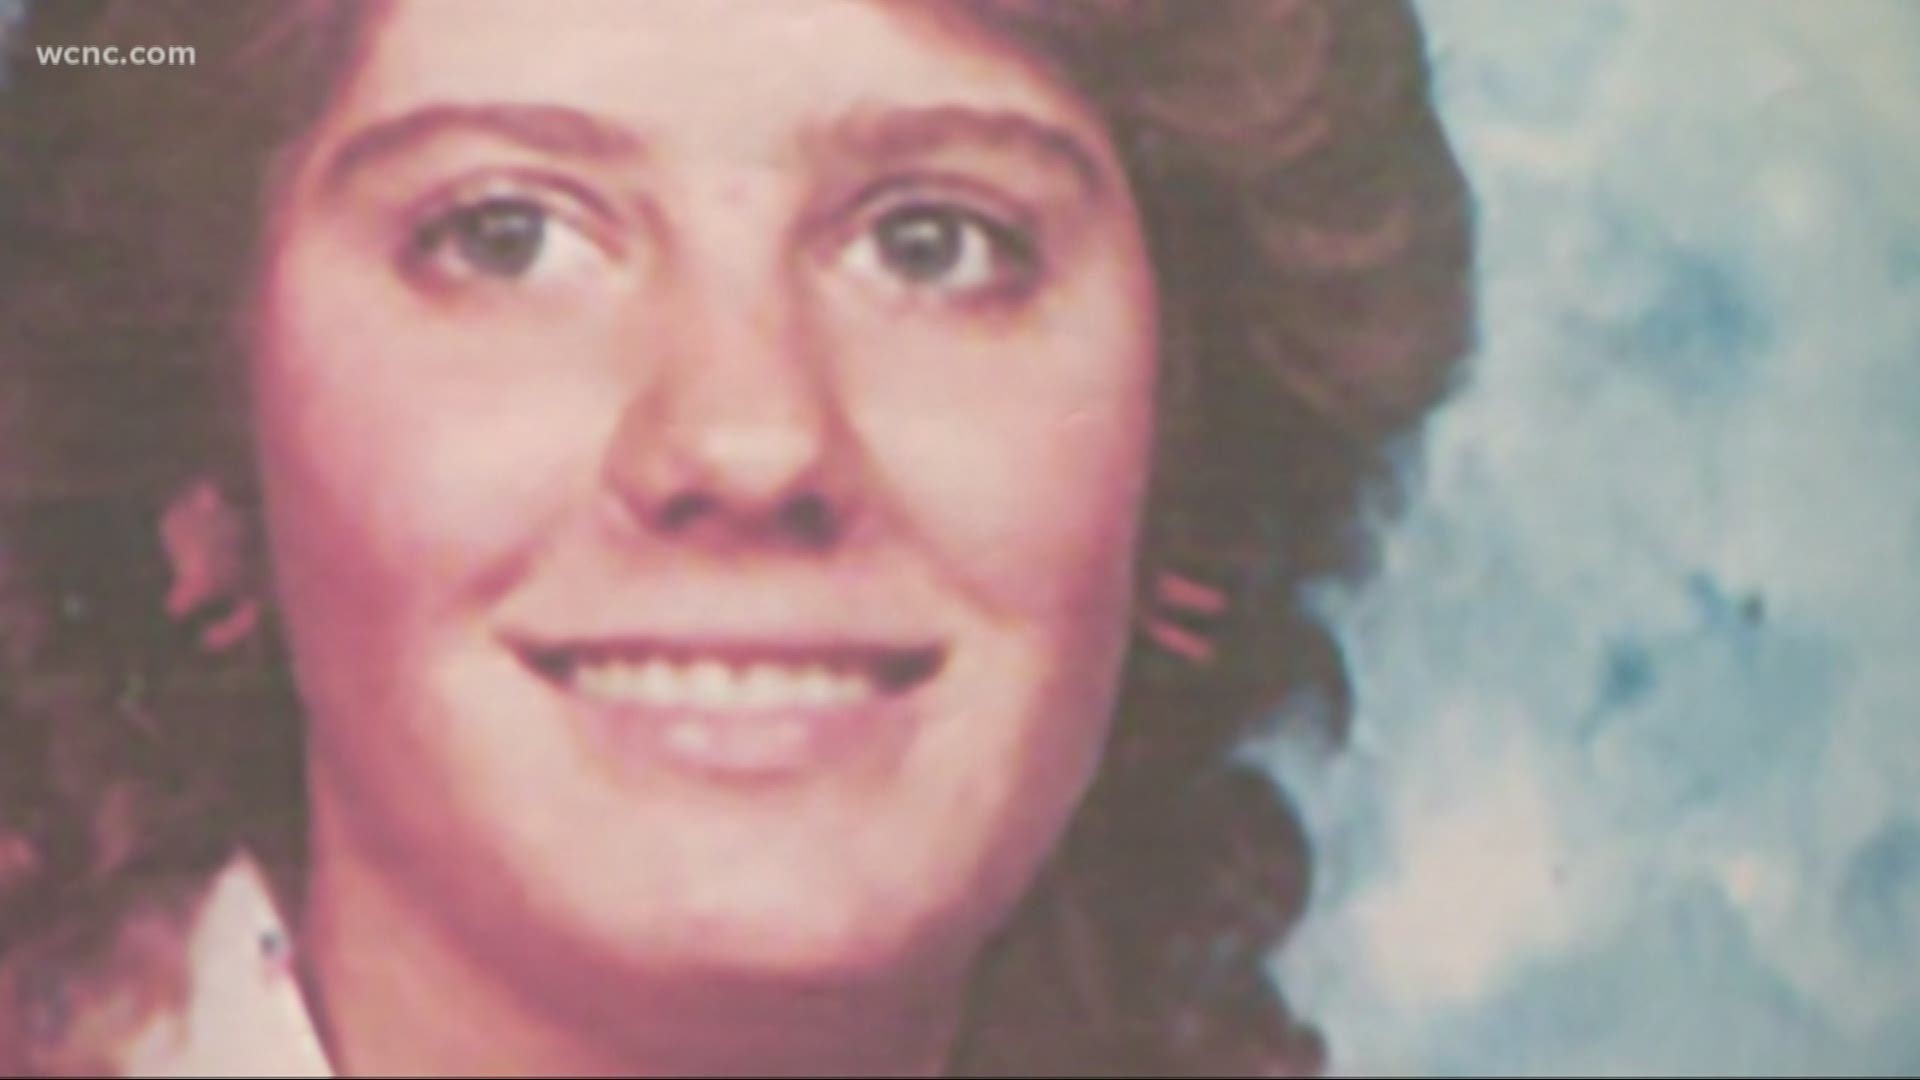 In the summer of 1984, investigators found the body of 15-year-old Reesa Dawn Trexler in her grandparents home in Salisbury.